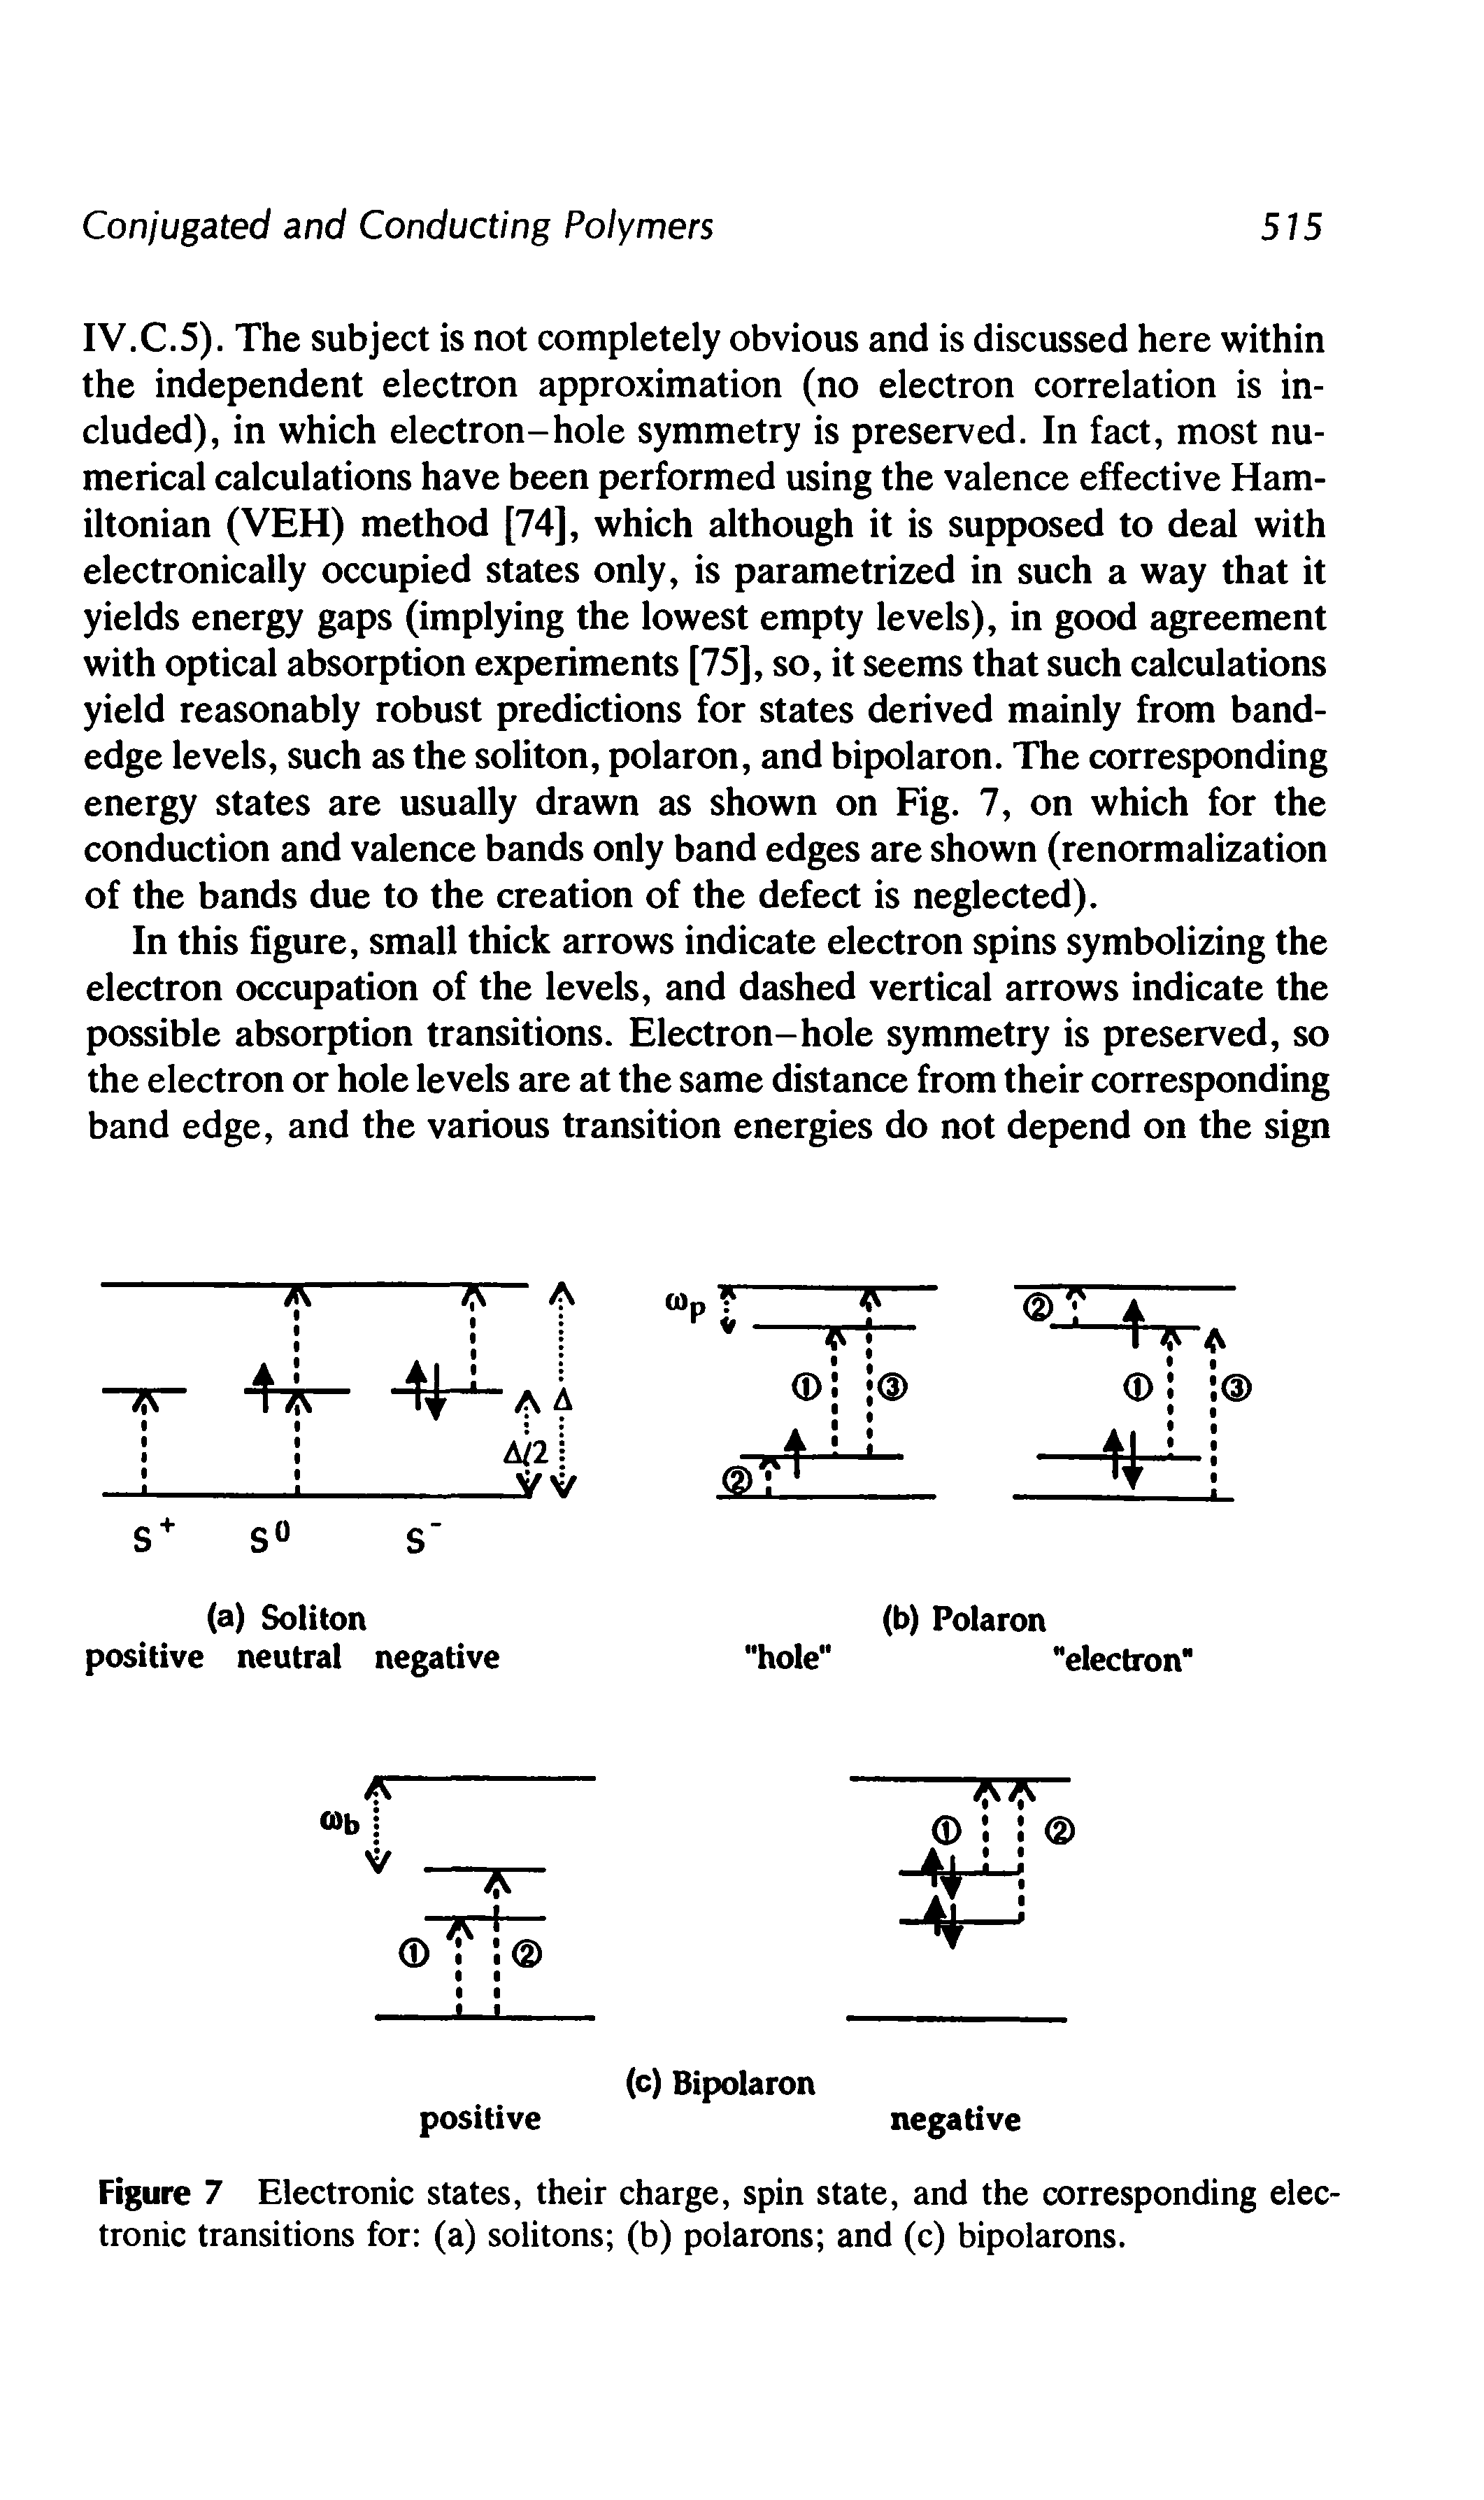 Figure 7 Electronic states, their charge, spin state, and the corresponding electronic transitions for (a) solitons (b) polarons and (c) bipolarons.